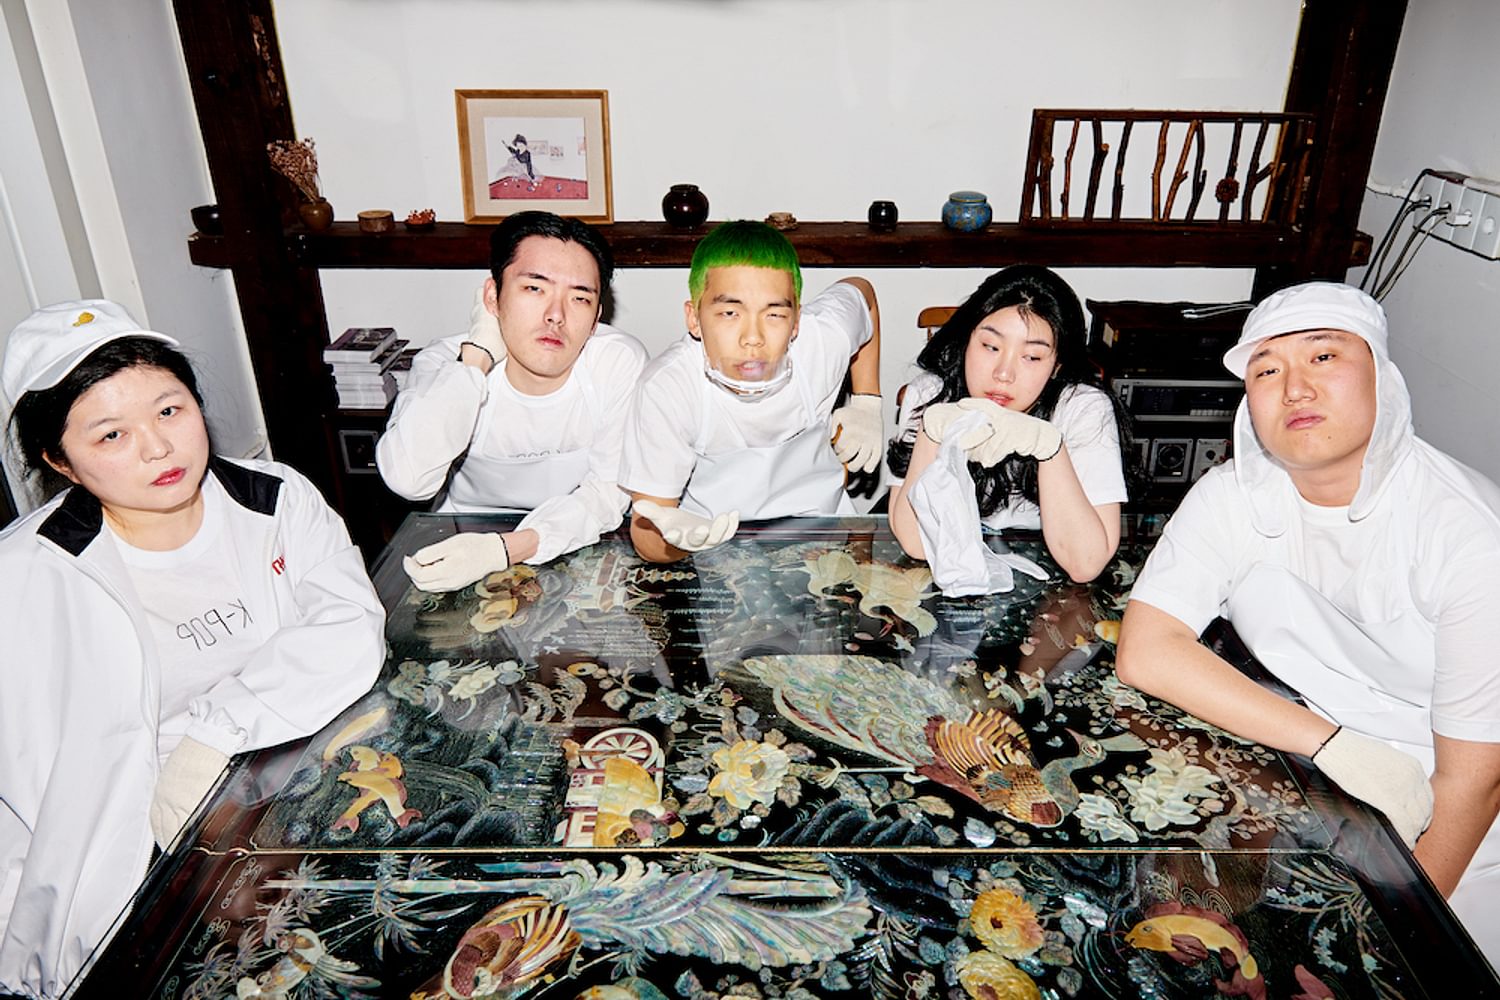 Balming Tiger: “We’d love to give the world a taste of Korean underground music”